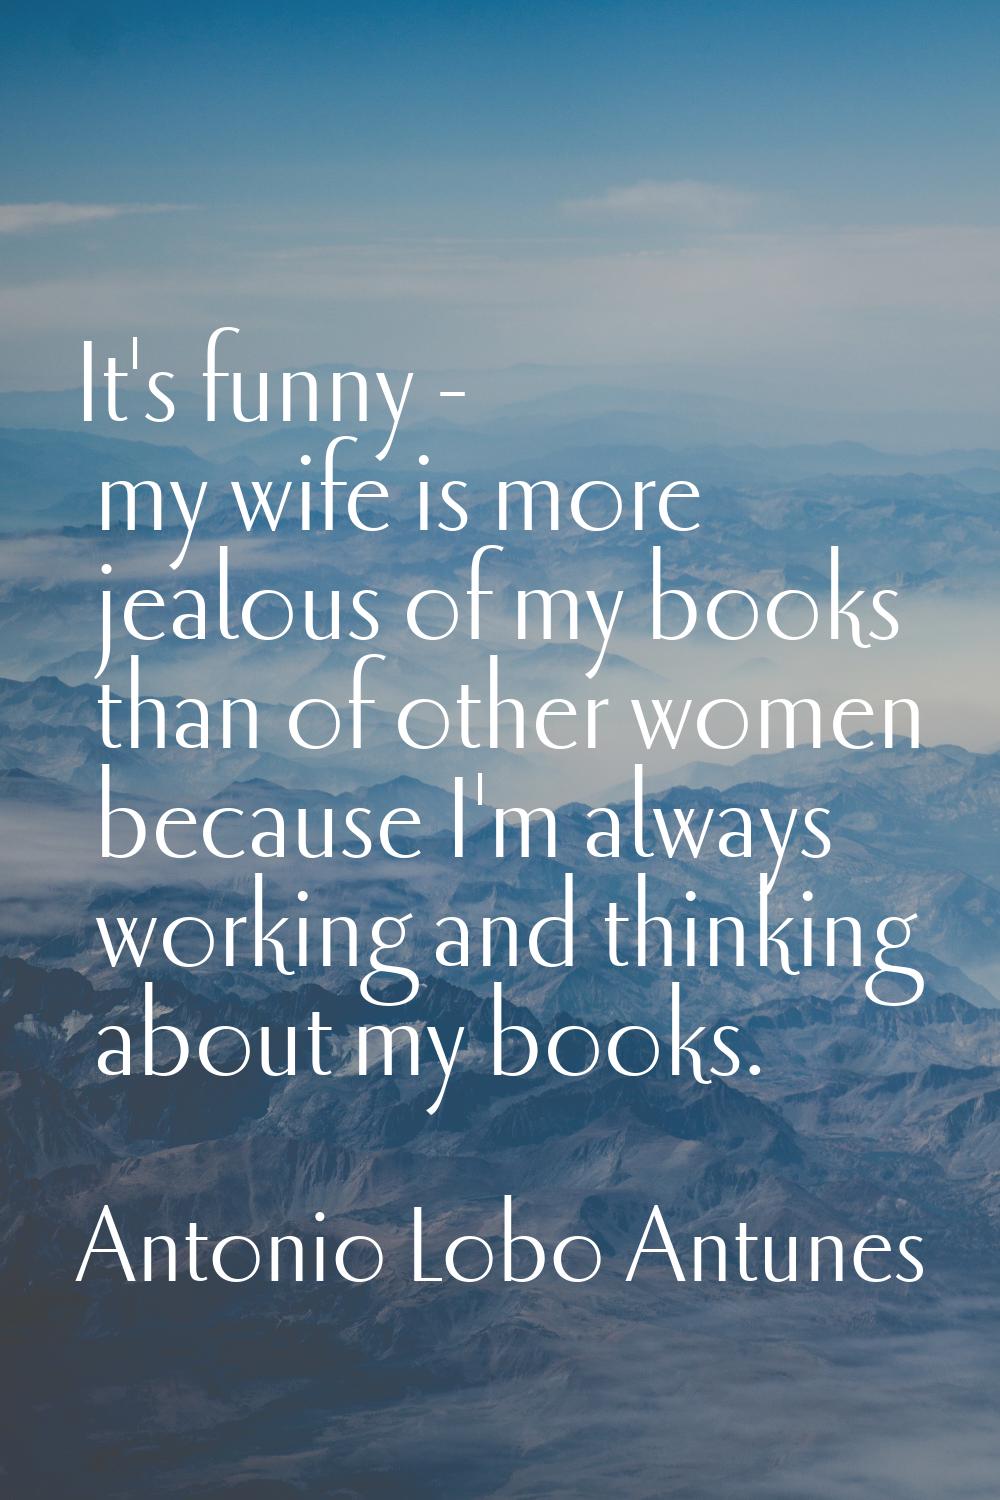 It's funny - my wife is more jealous of my books than of other women because I'm always working and